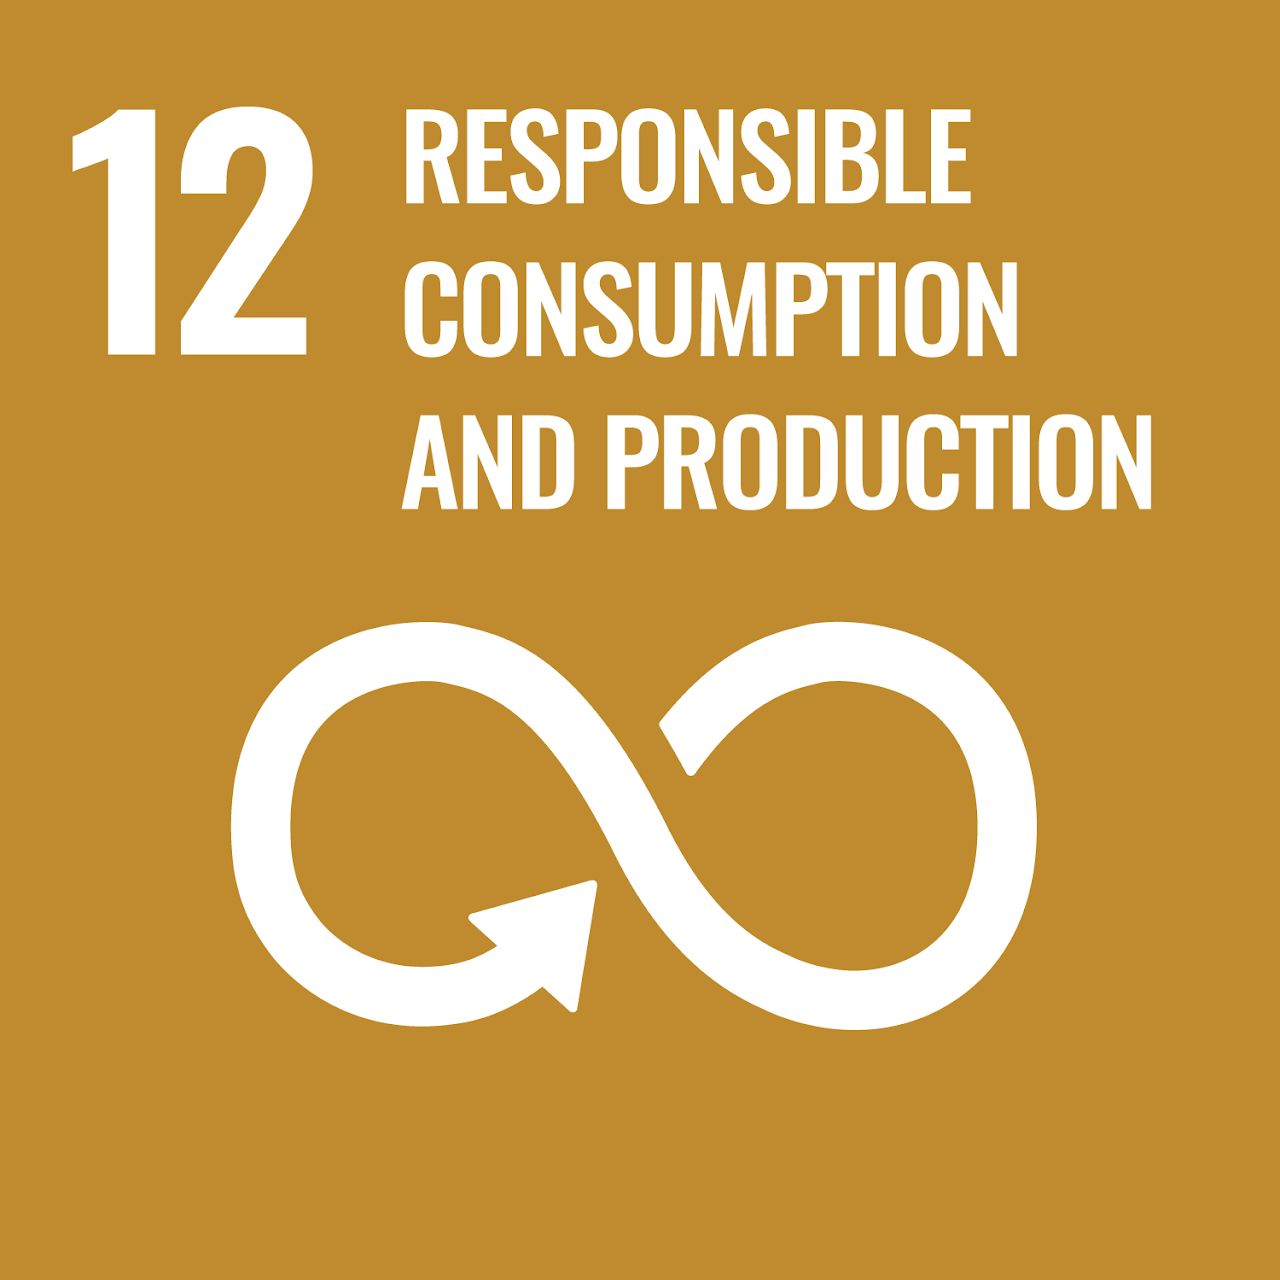 12° Responsible consumption and production